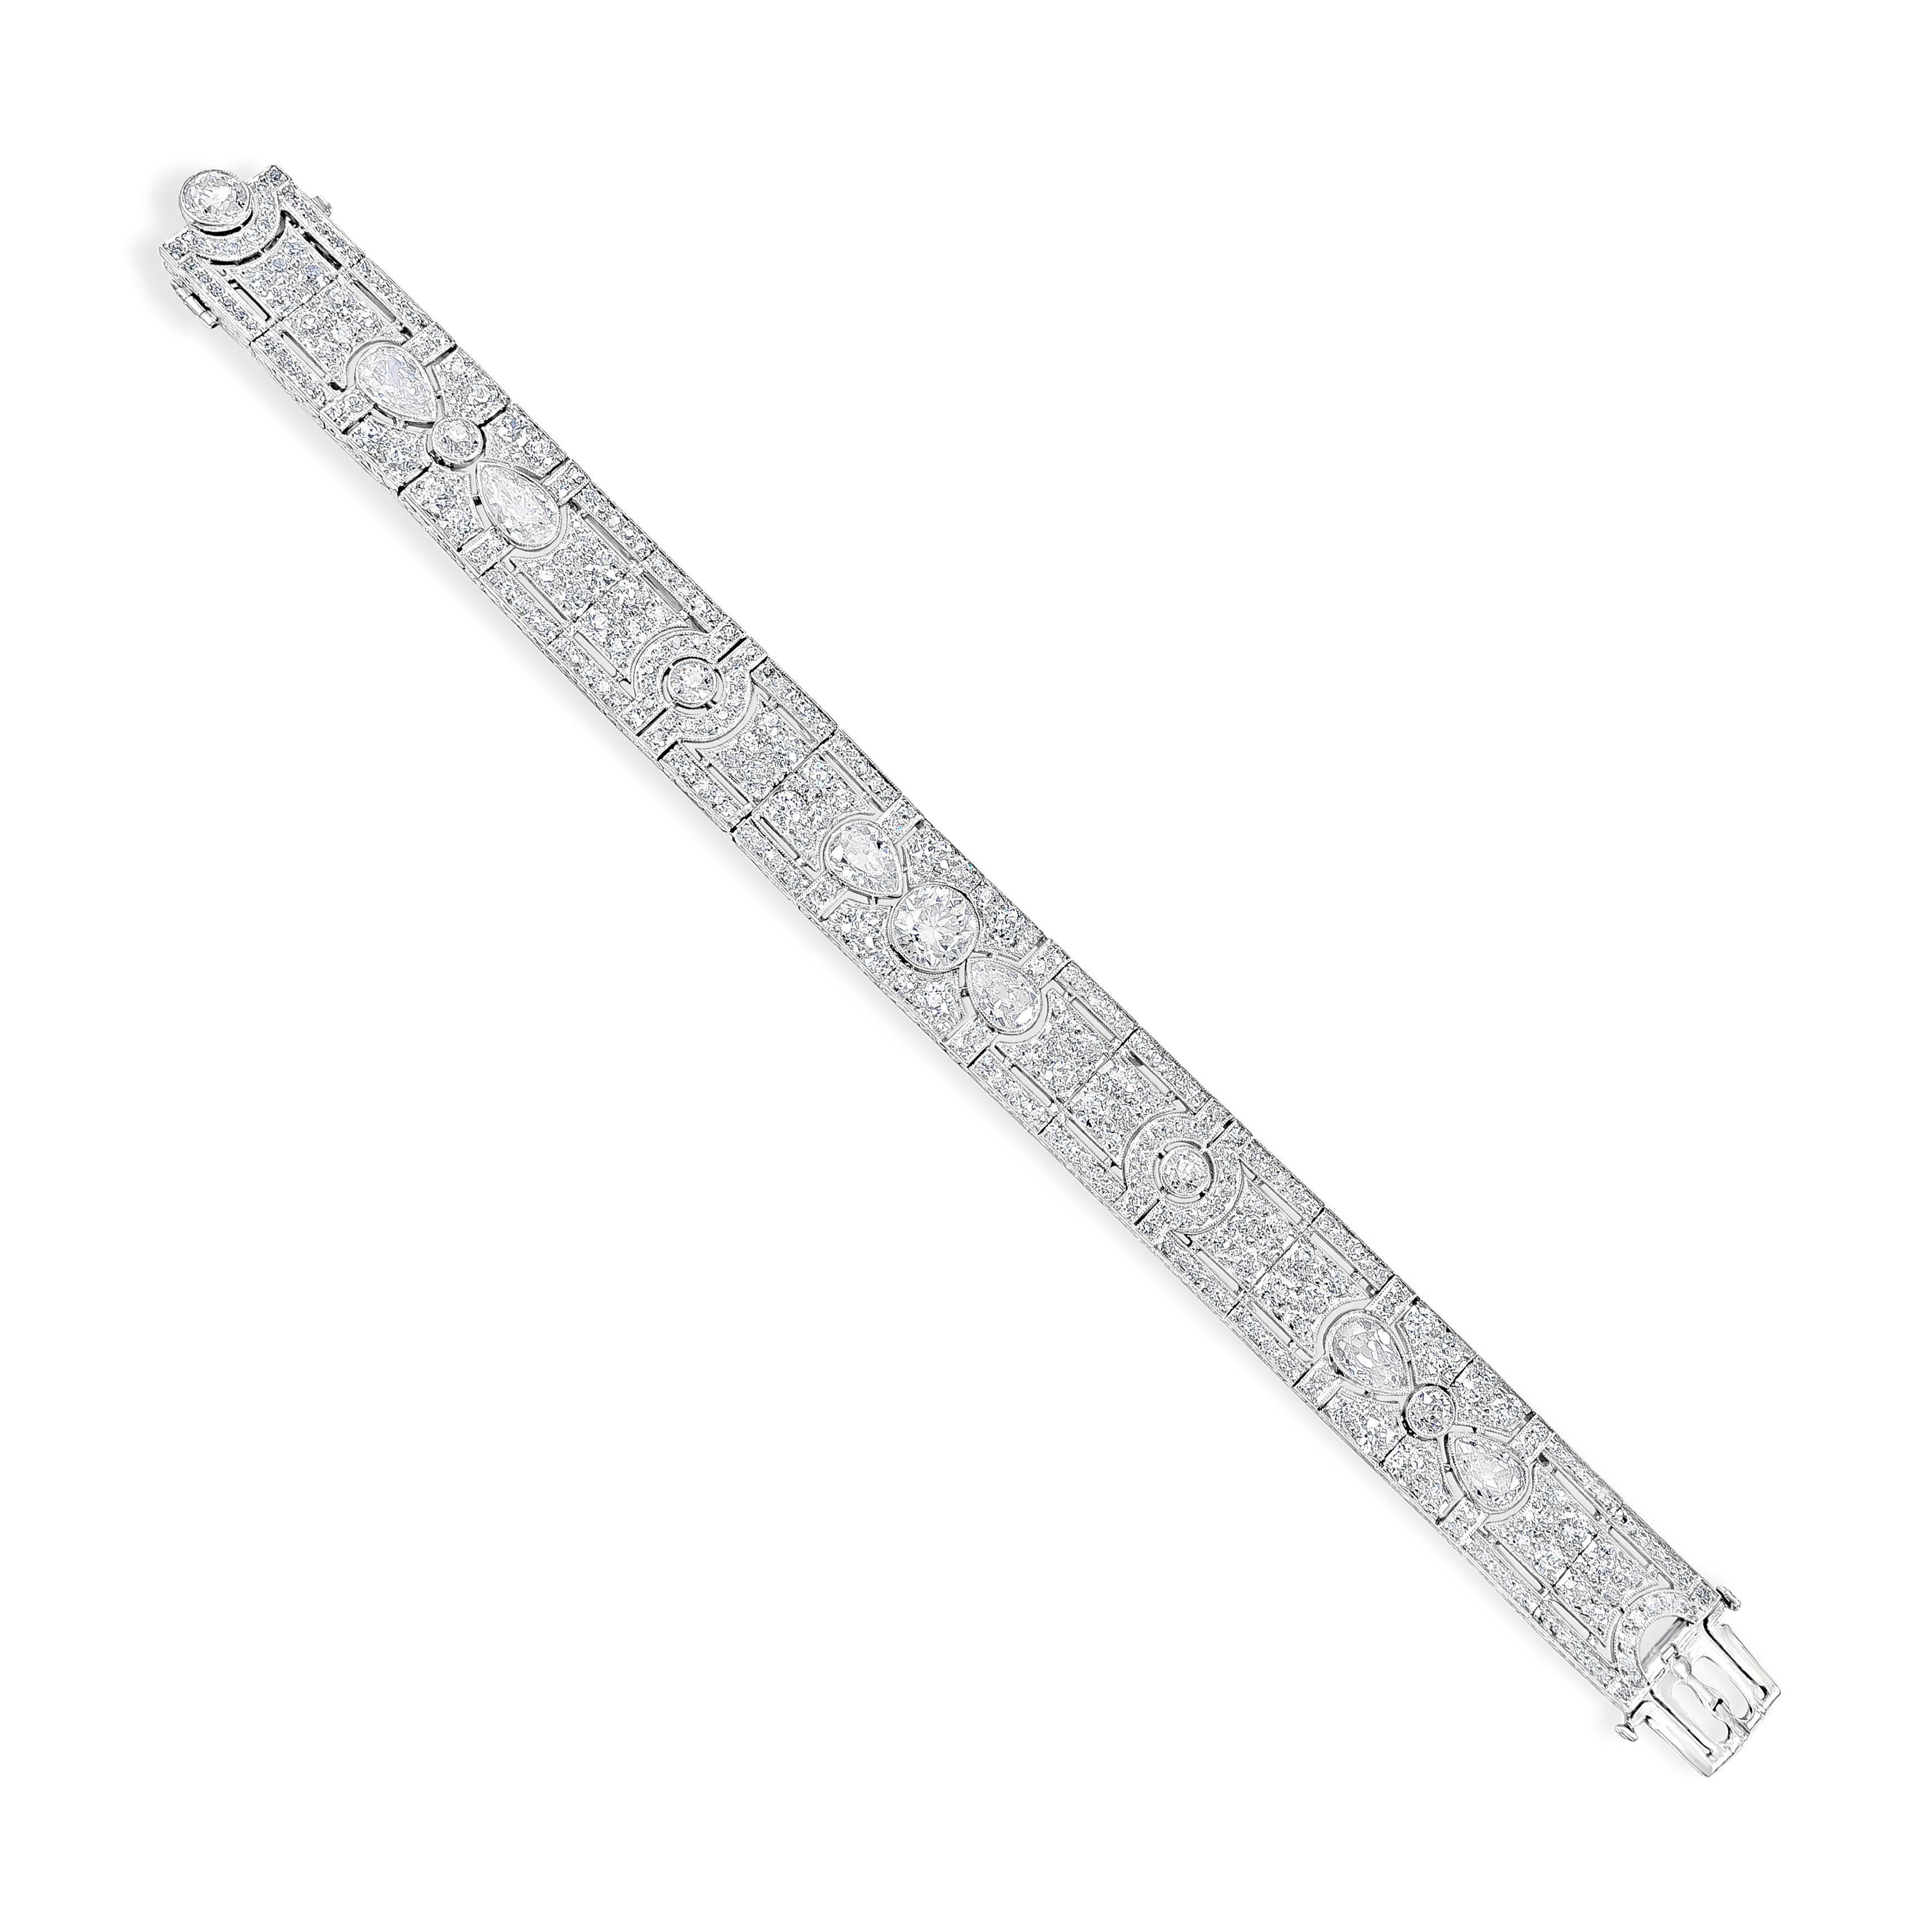 An antique open-work design art deco bracelet encrusted with 17 carats total of brilliant mixed cut diamonds. Made in platinum. 7 inches in length.